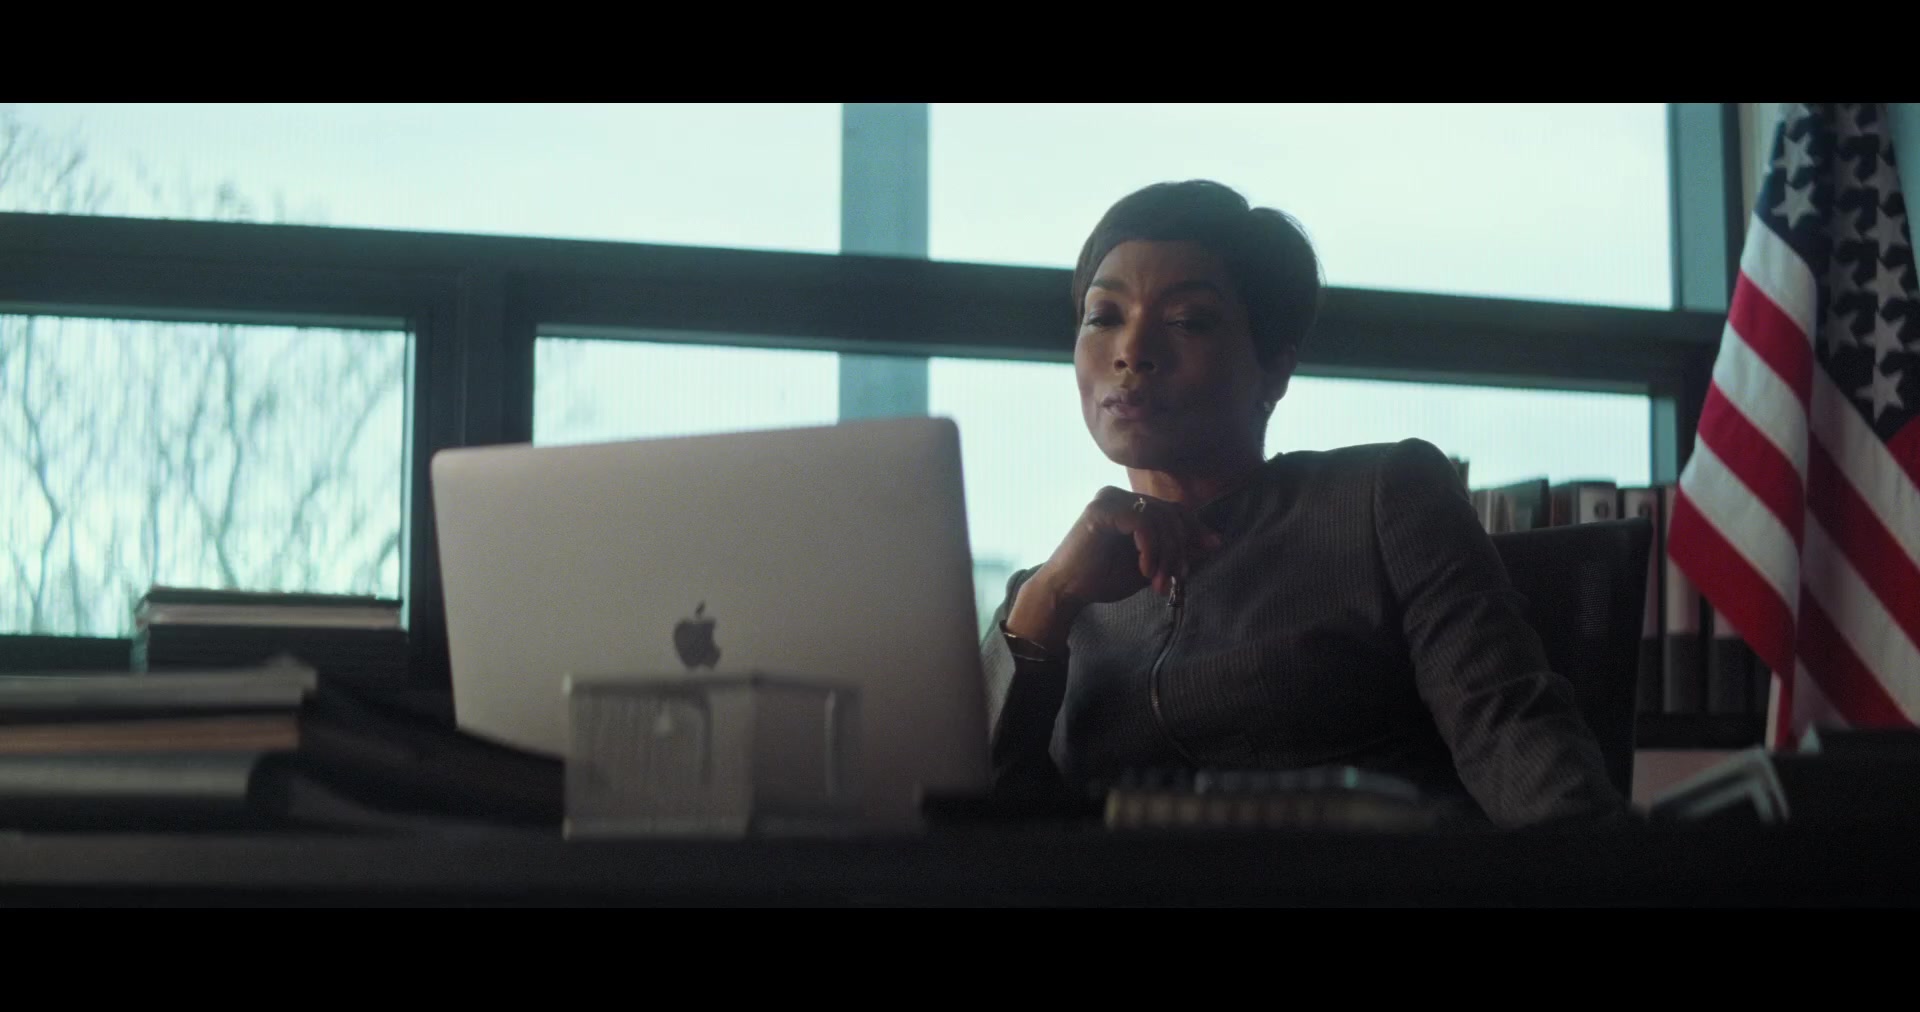 Apple Macbook Pro Laptop Used By Angela Bassett In Mission Impossible Fallout 2018